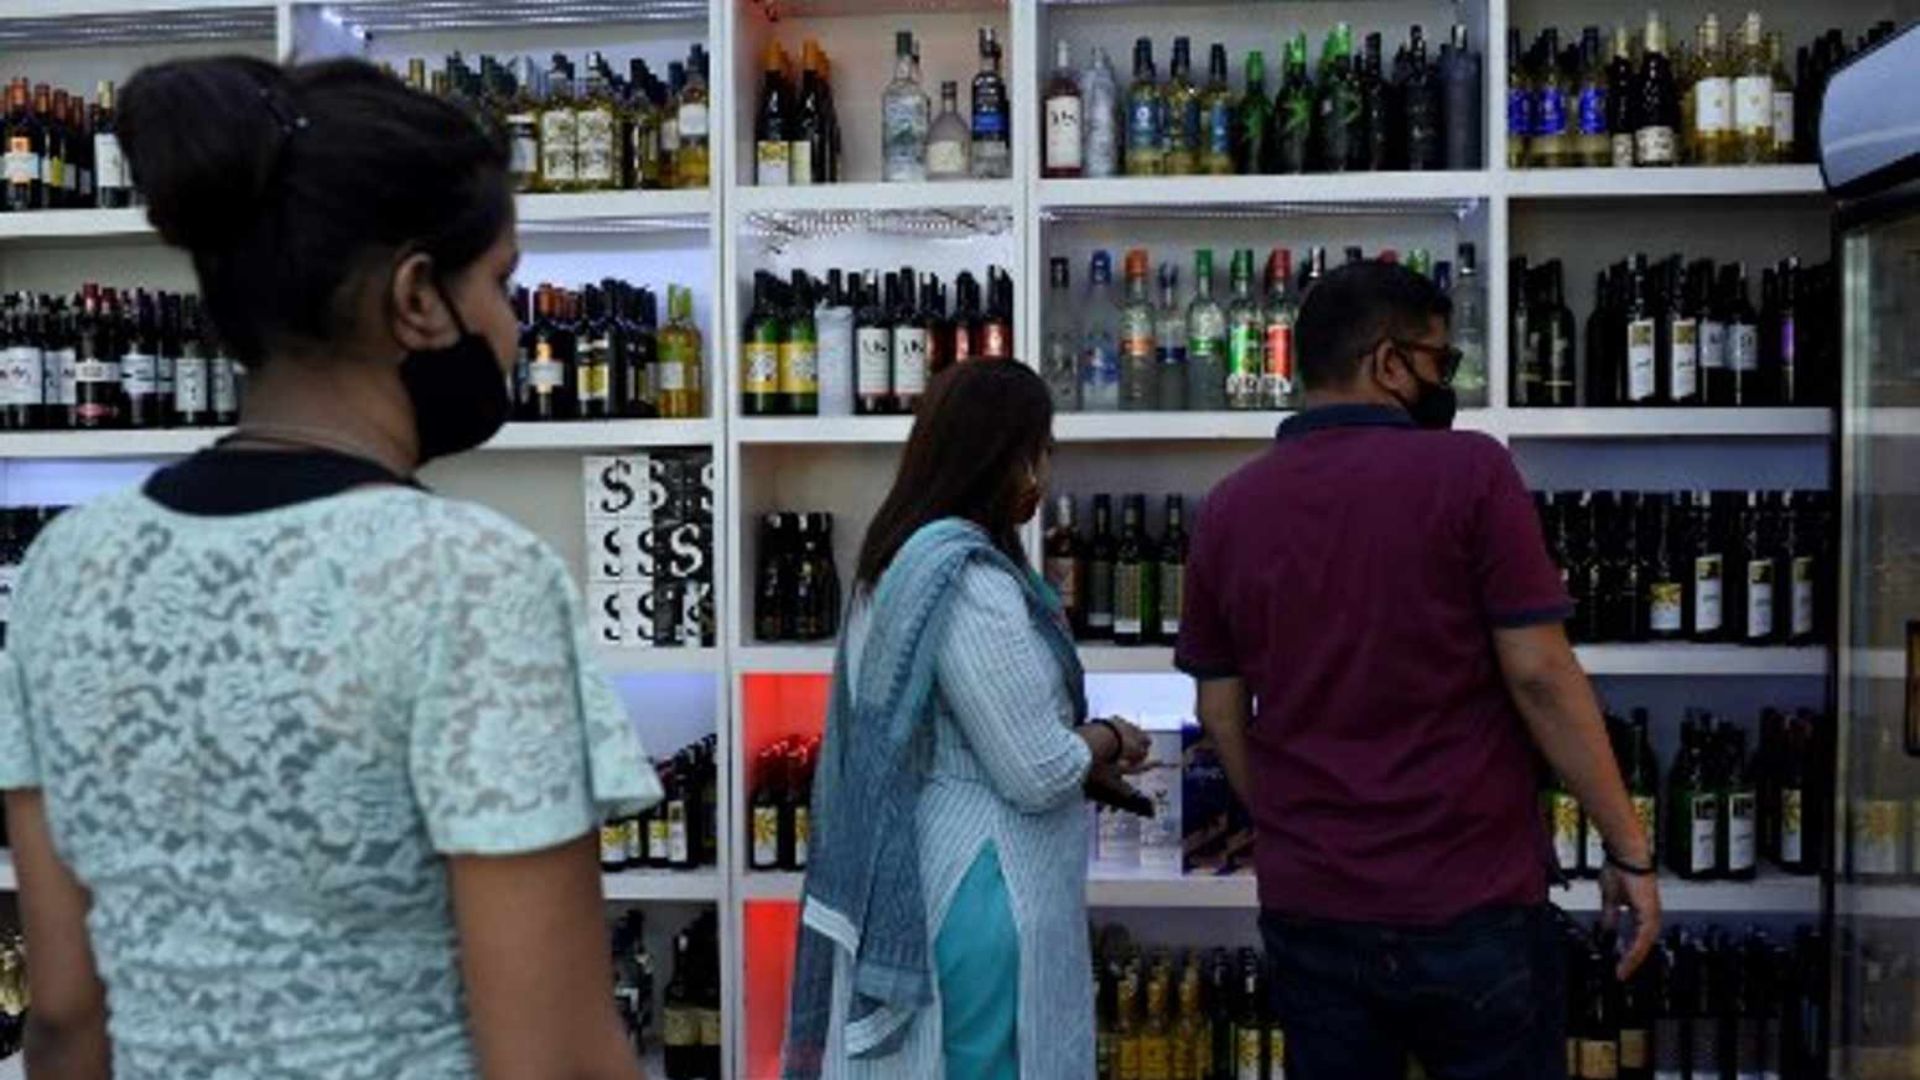 Women Visit Premium Liquor Stores More As they Are Safer, Suggests Report